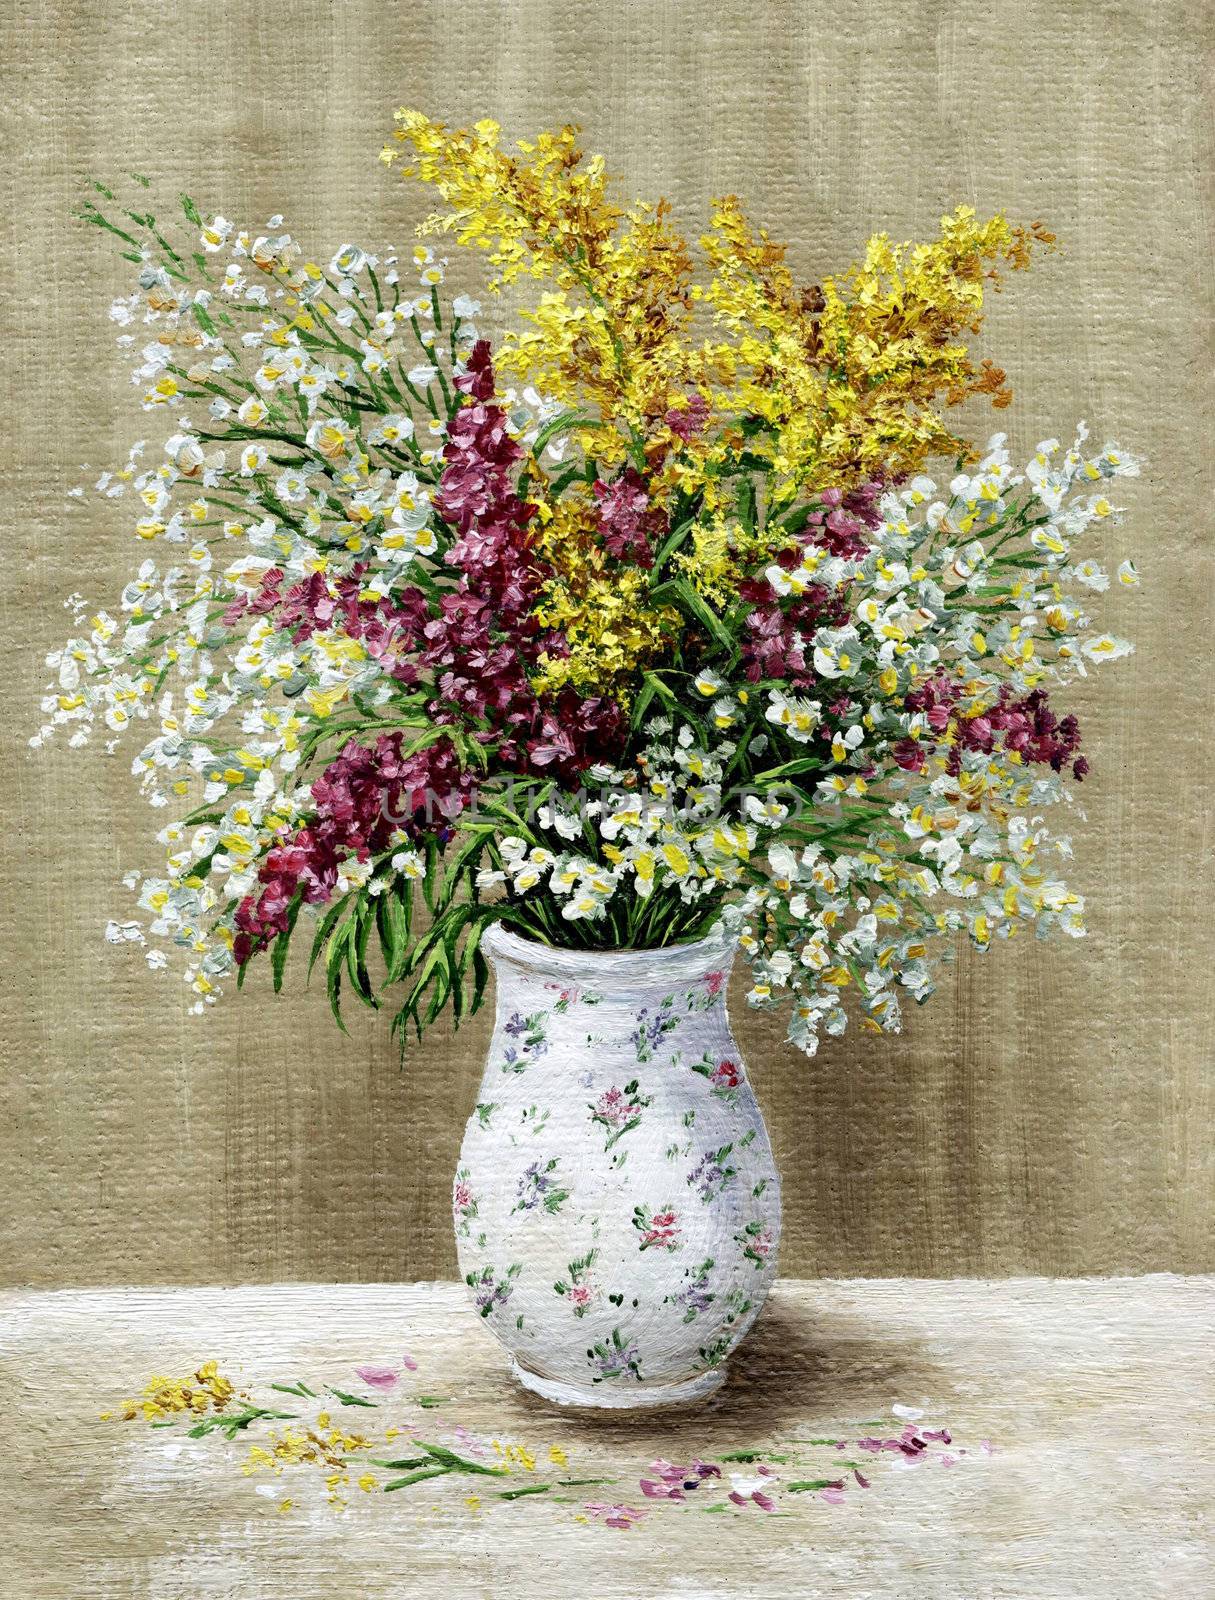 Wild flowers in a white vase by alexcoolok